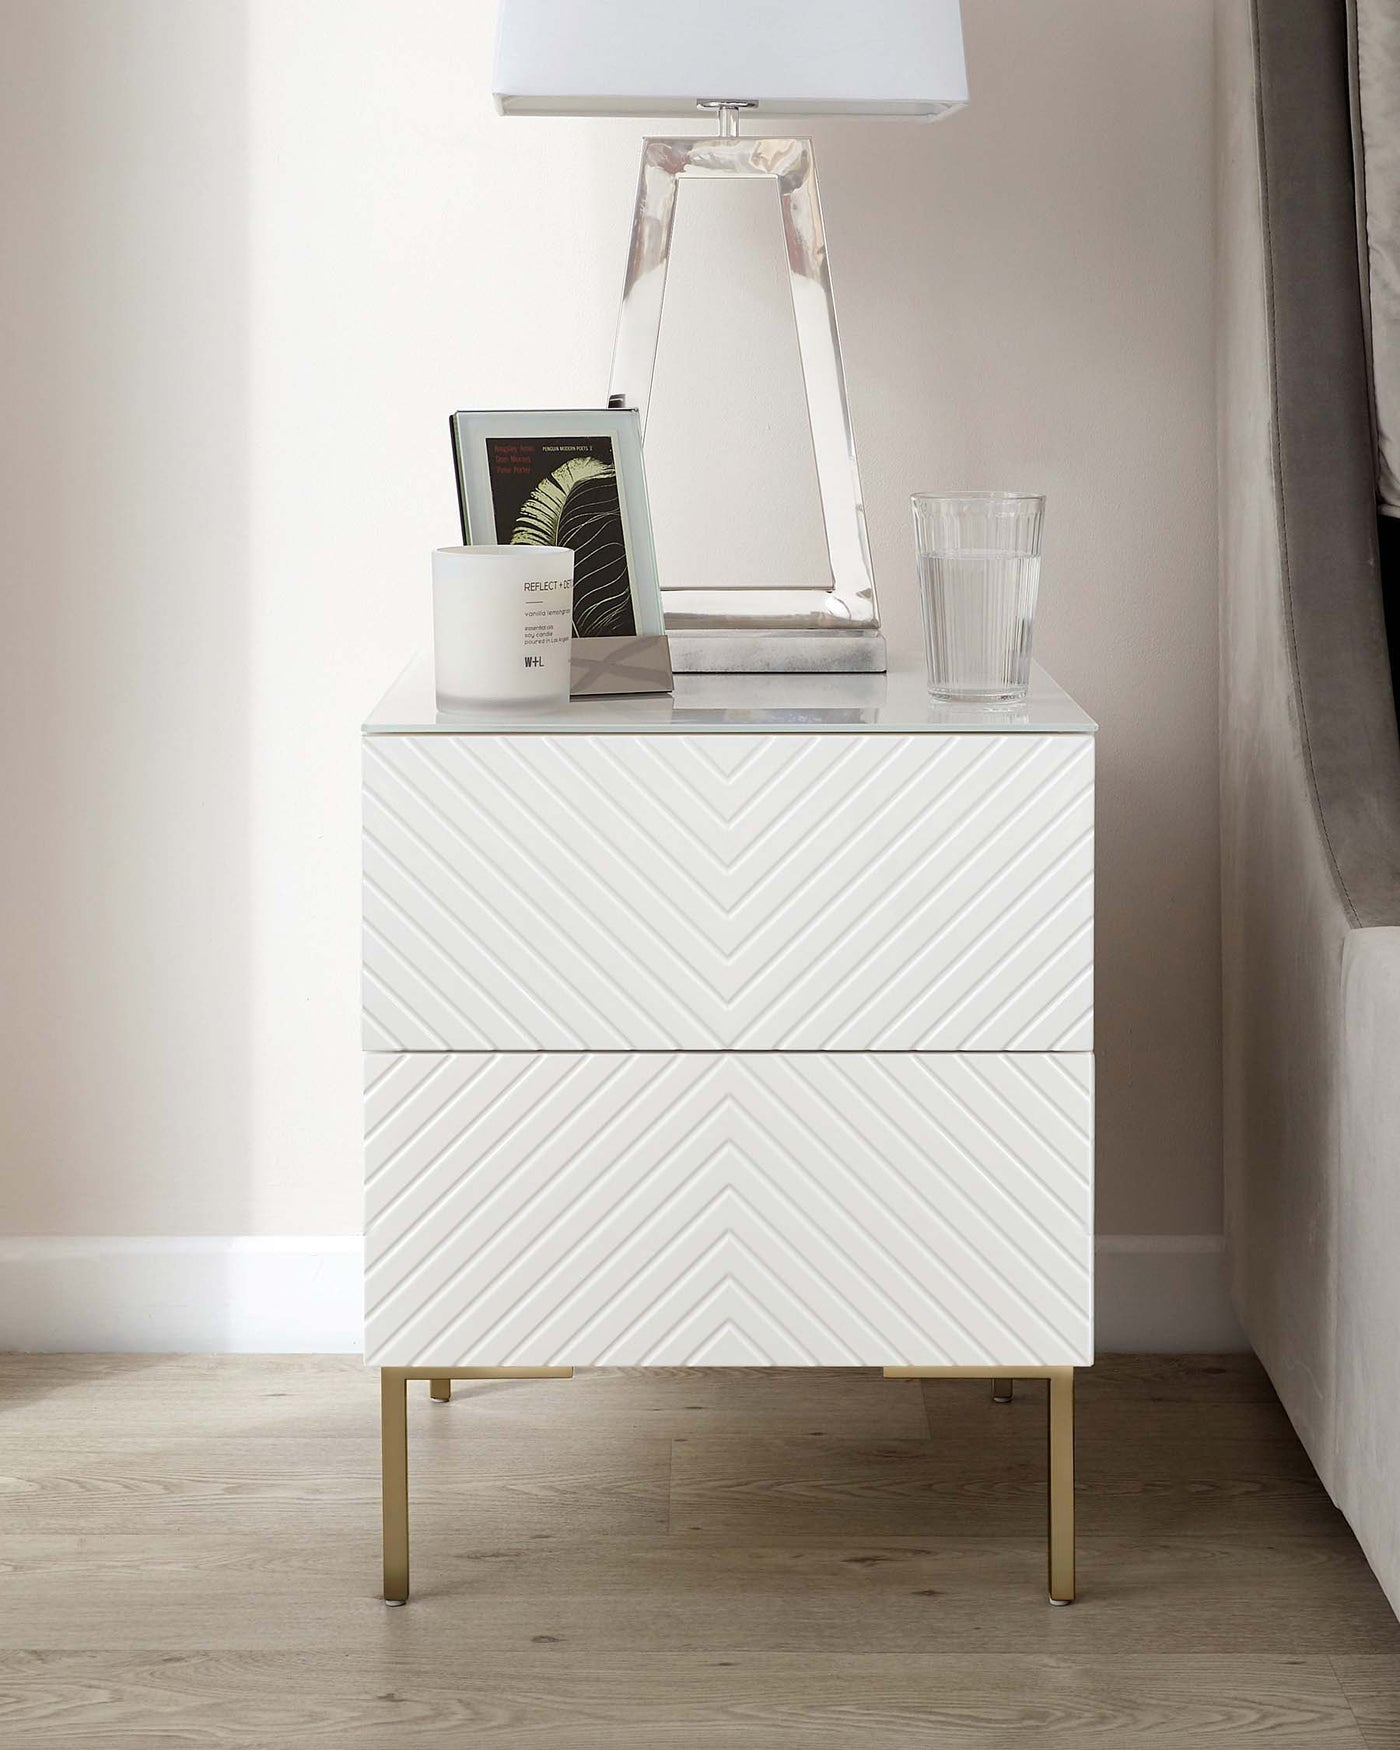 A contemporary white two-drawer nightstand with chevron patterned drawer fronts and brass-finished metal legs, adorned with a clear glass table lamp, a framed picture, and a clear water glass.